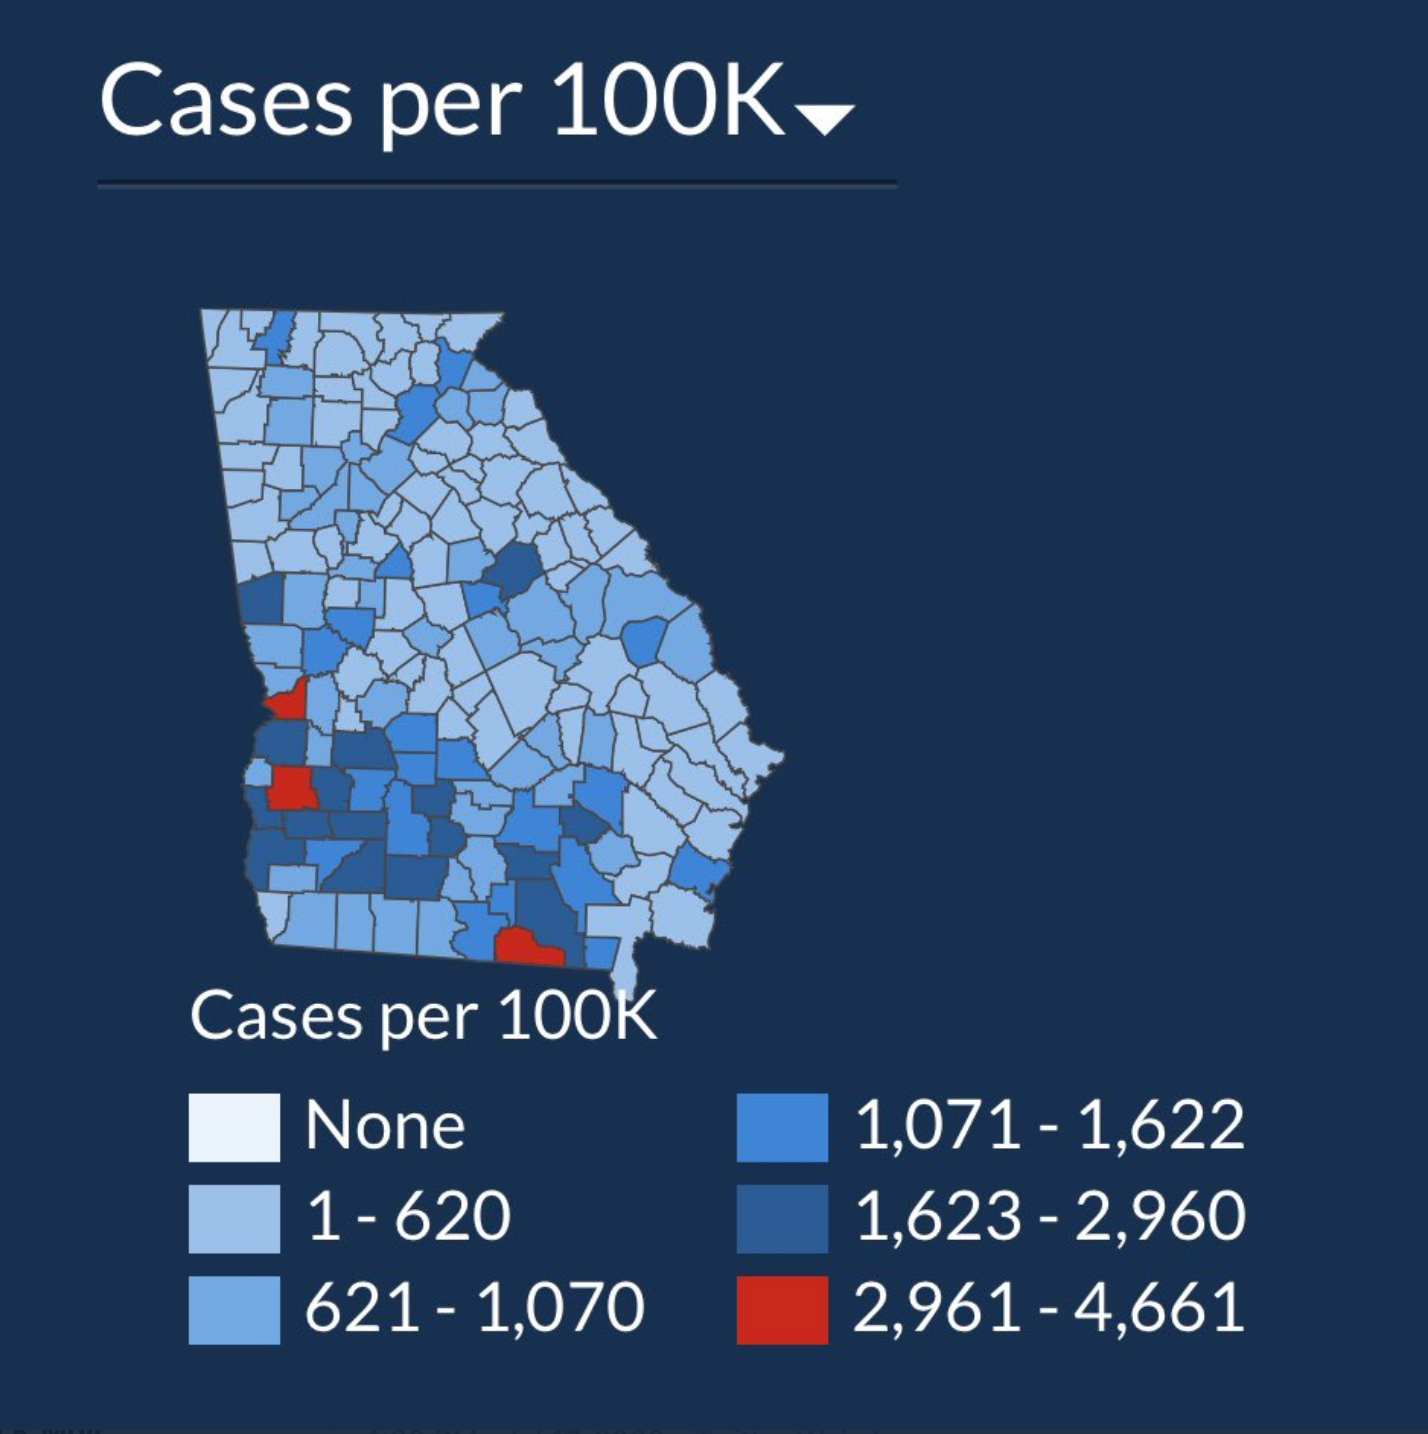 July 2nd heat map visualization of Georgia counties showing cases per 100K residents, with bins covering ranges from 1-620, 621-1070, 1071 - 1622, 1623 - 2960, with the red bins covering a range from 2961 - 4661.